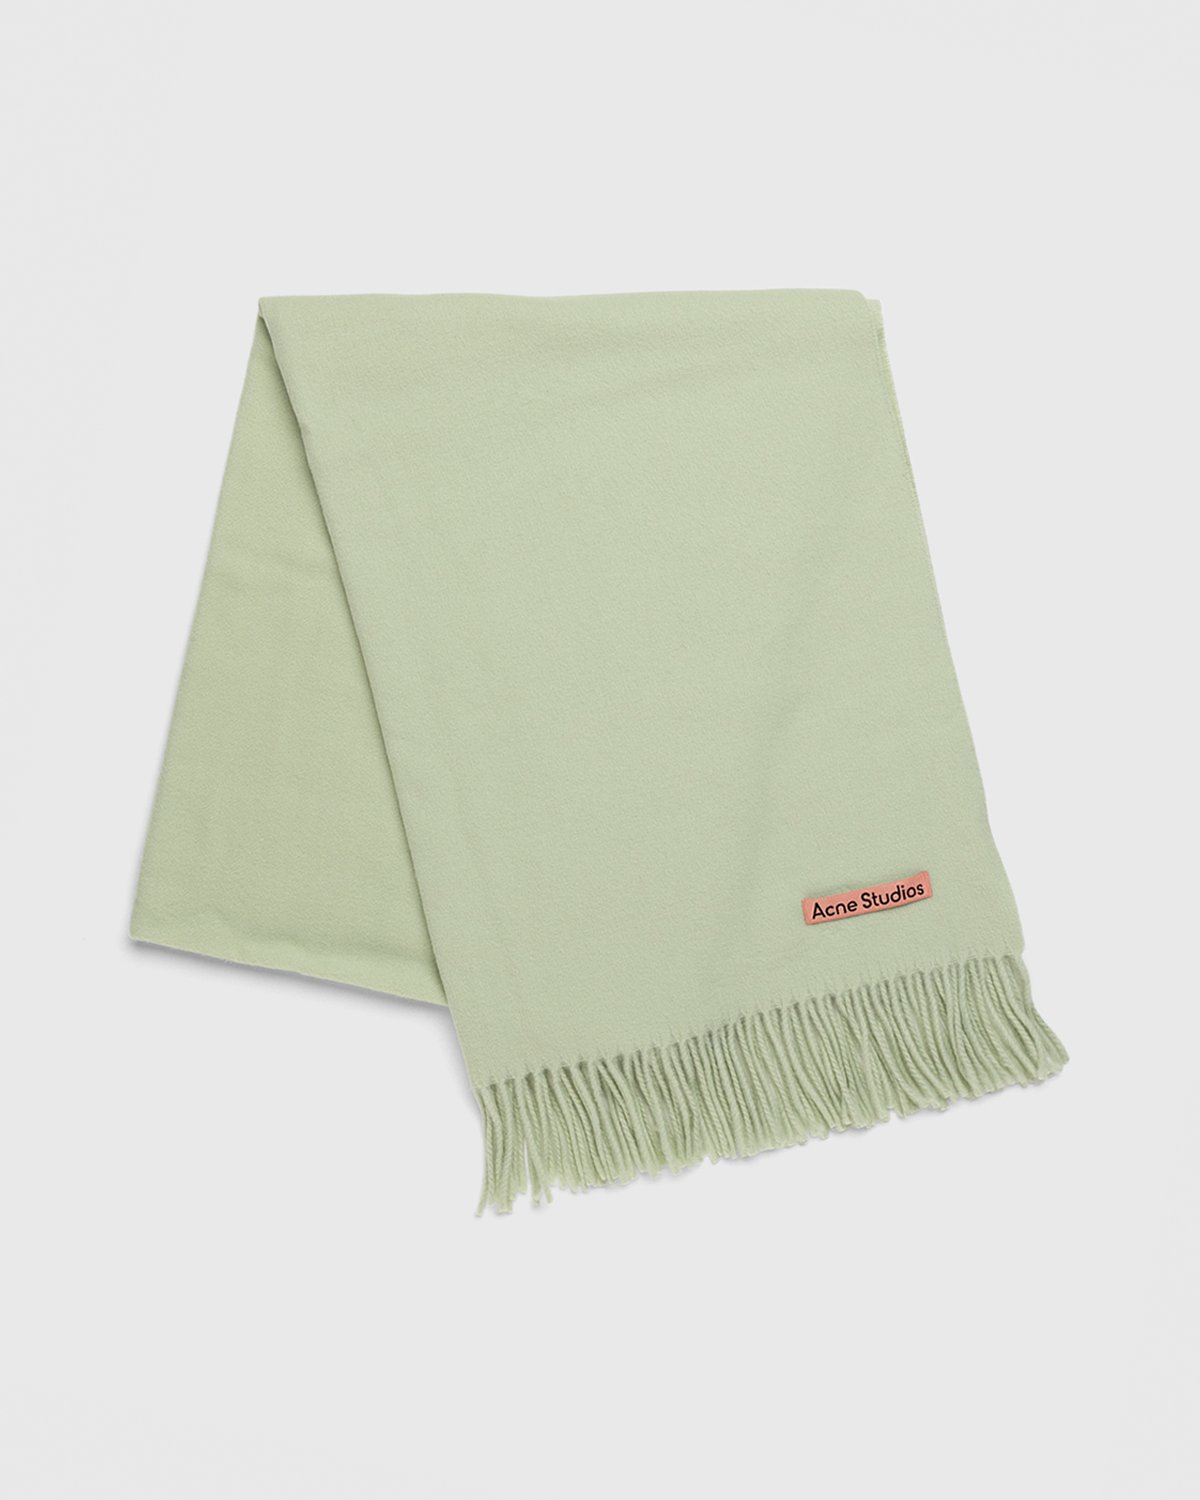 Acne Studios - Canada New Scarf Pale Green - Accessories - Green - Image 1